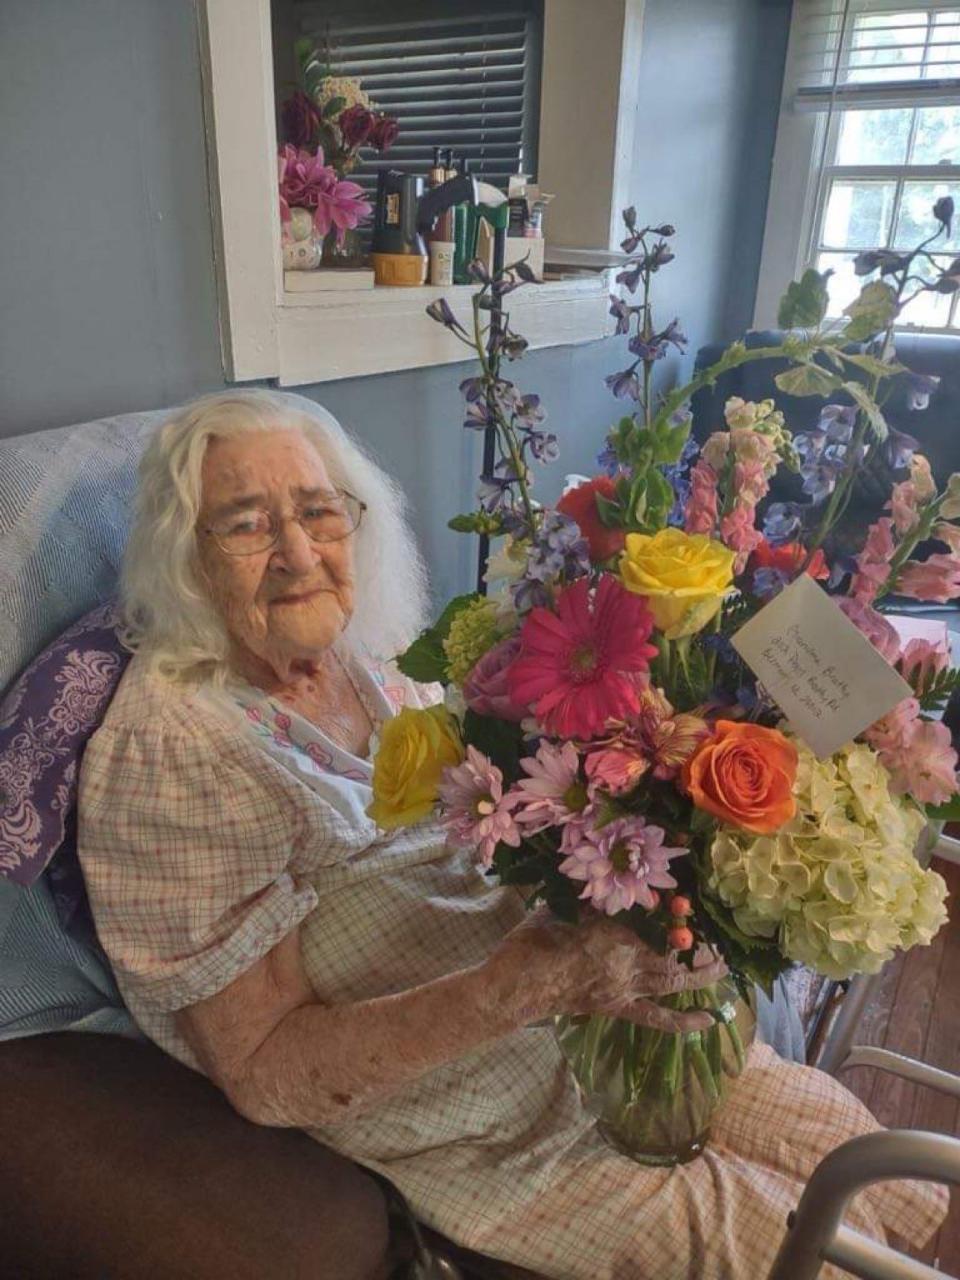 Bonnie, who has lived a long life in North Carolina, attributed her longevity to her diet.